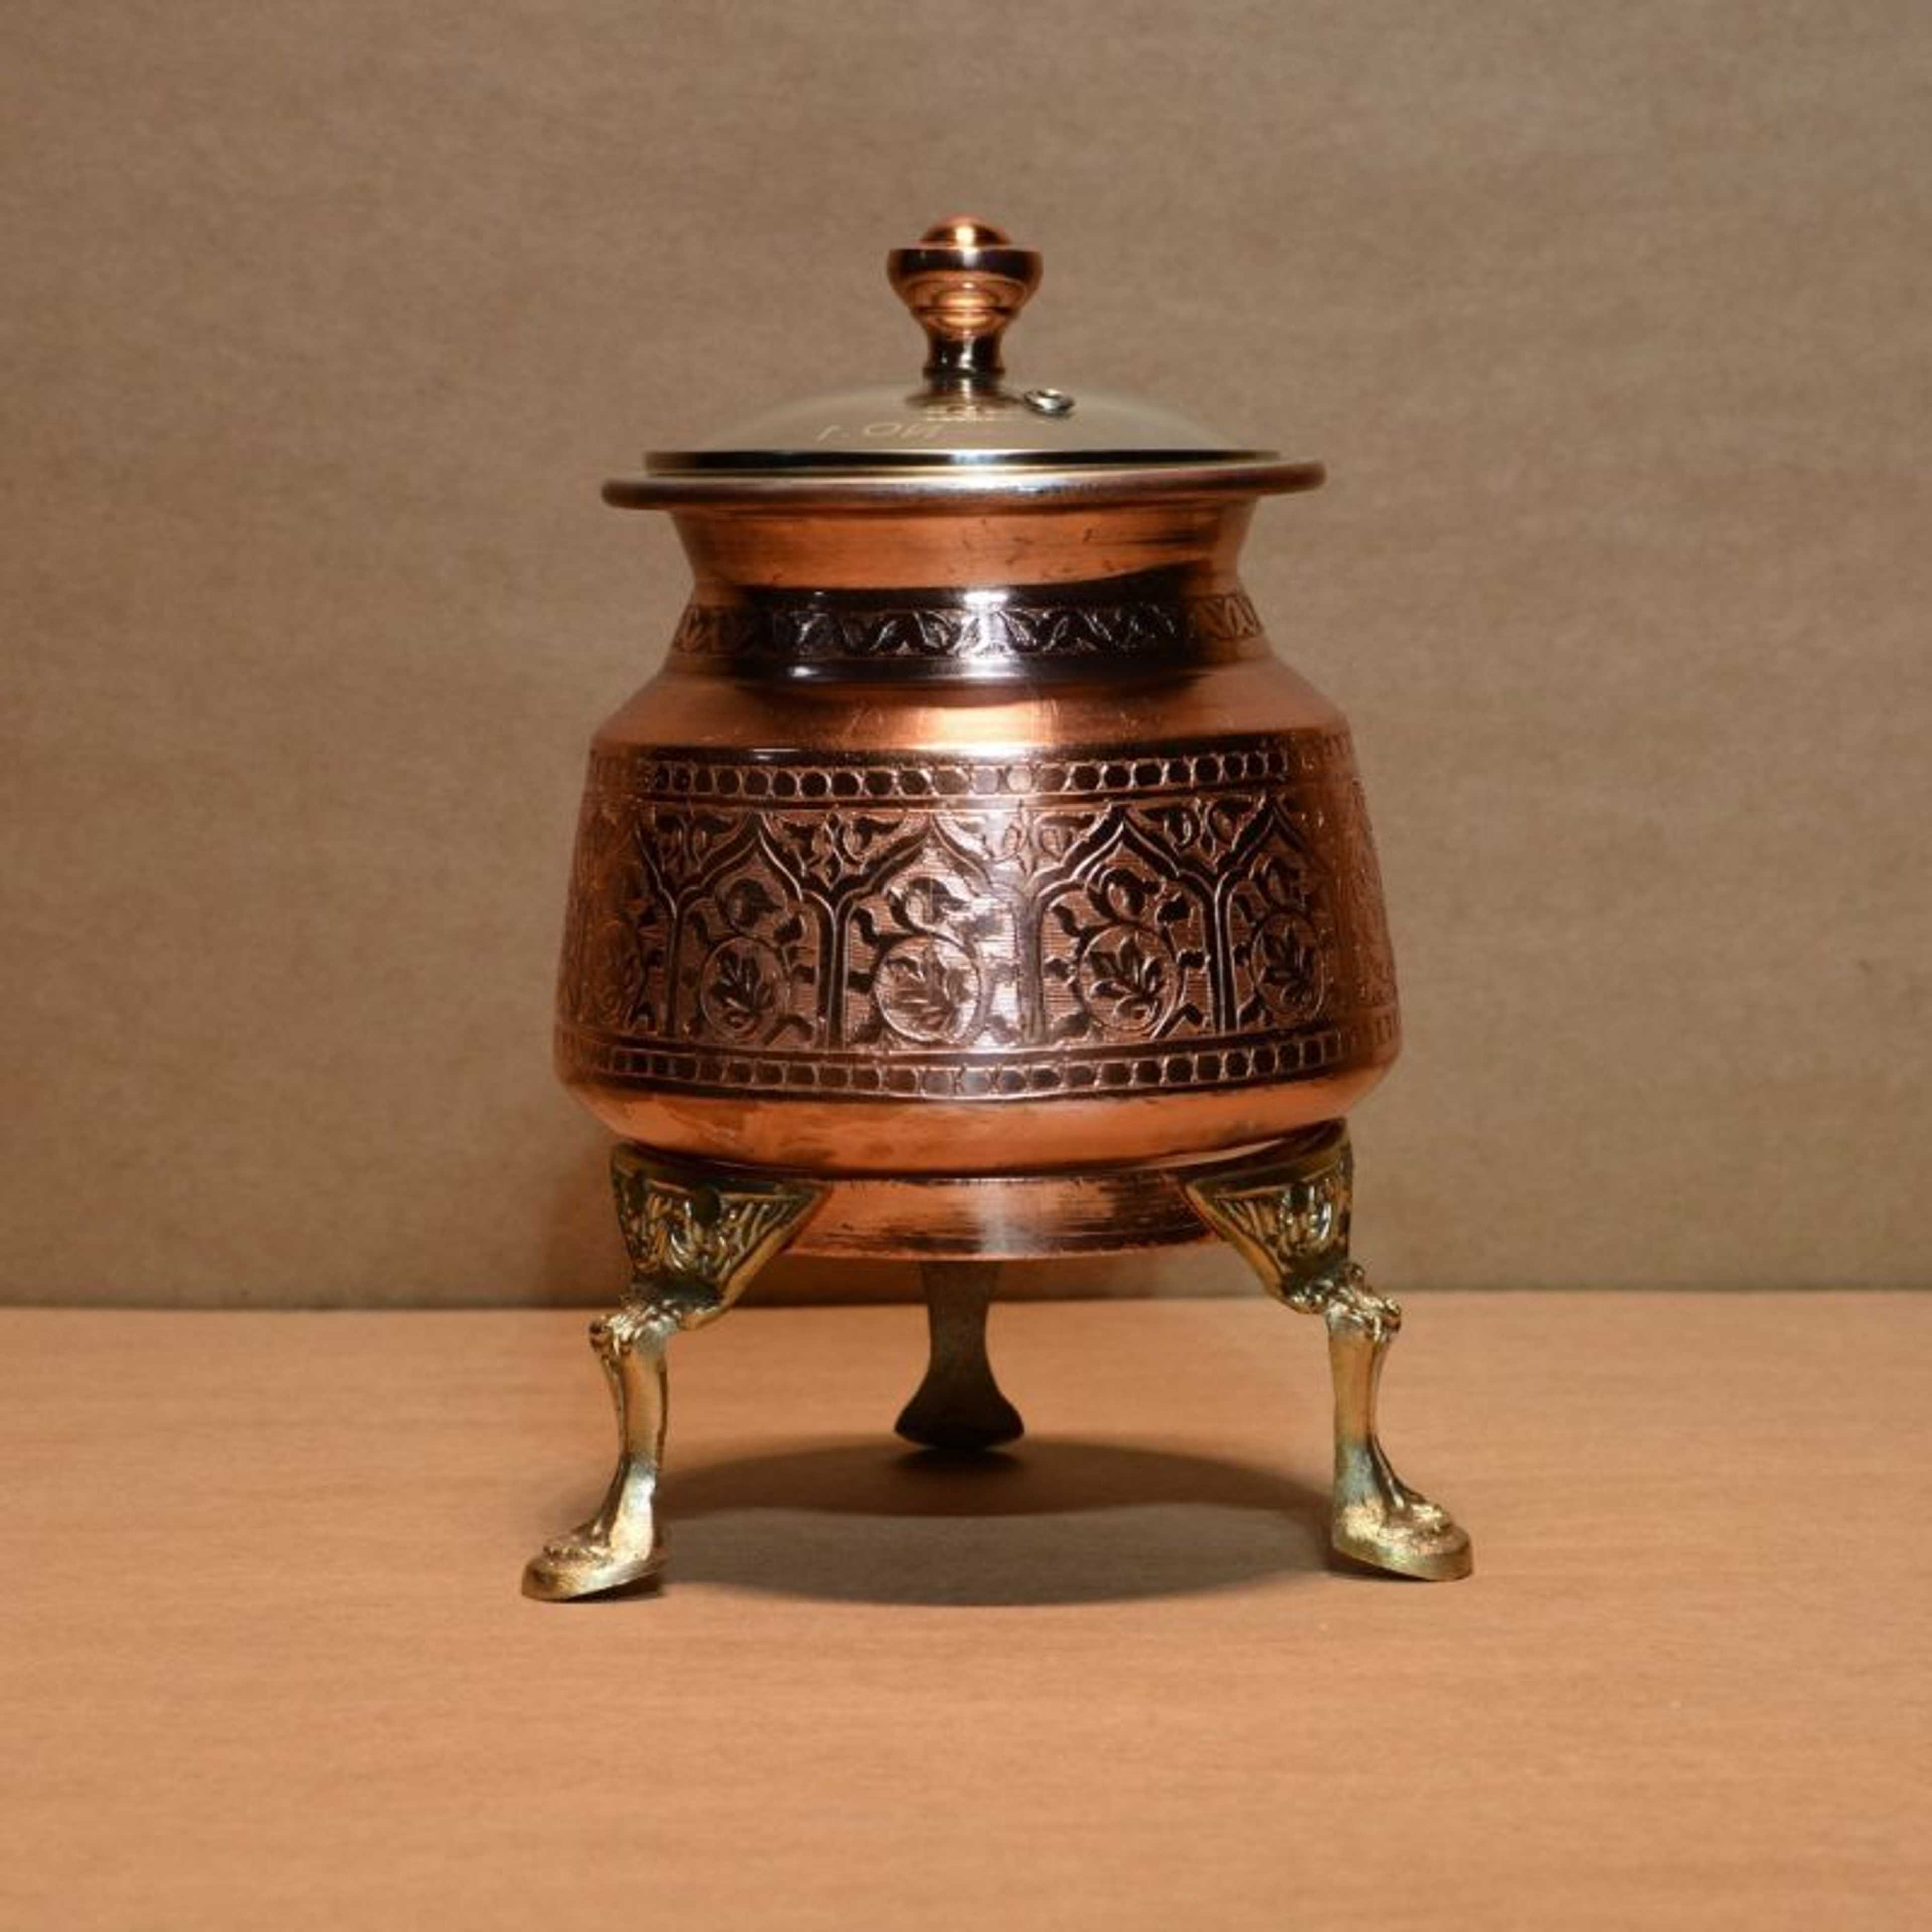 Engraved Copper Casserole With Glass Lid